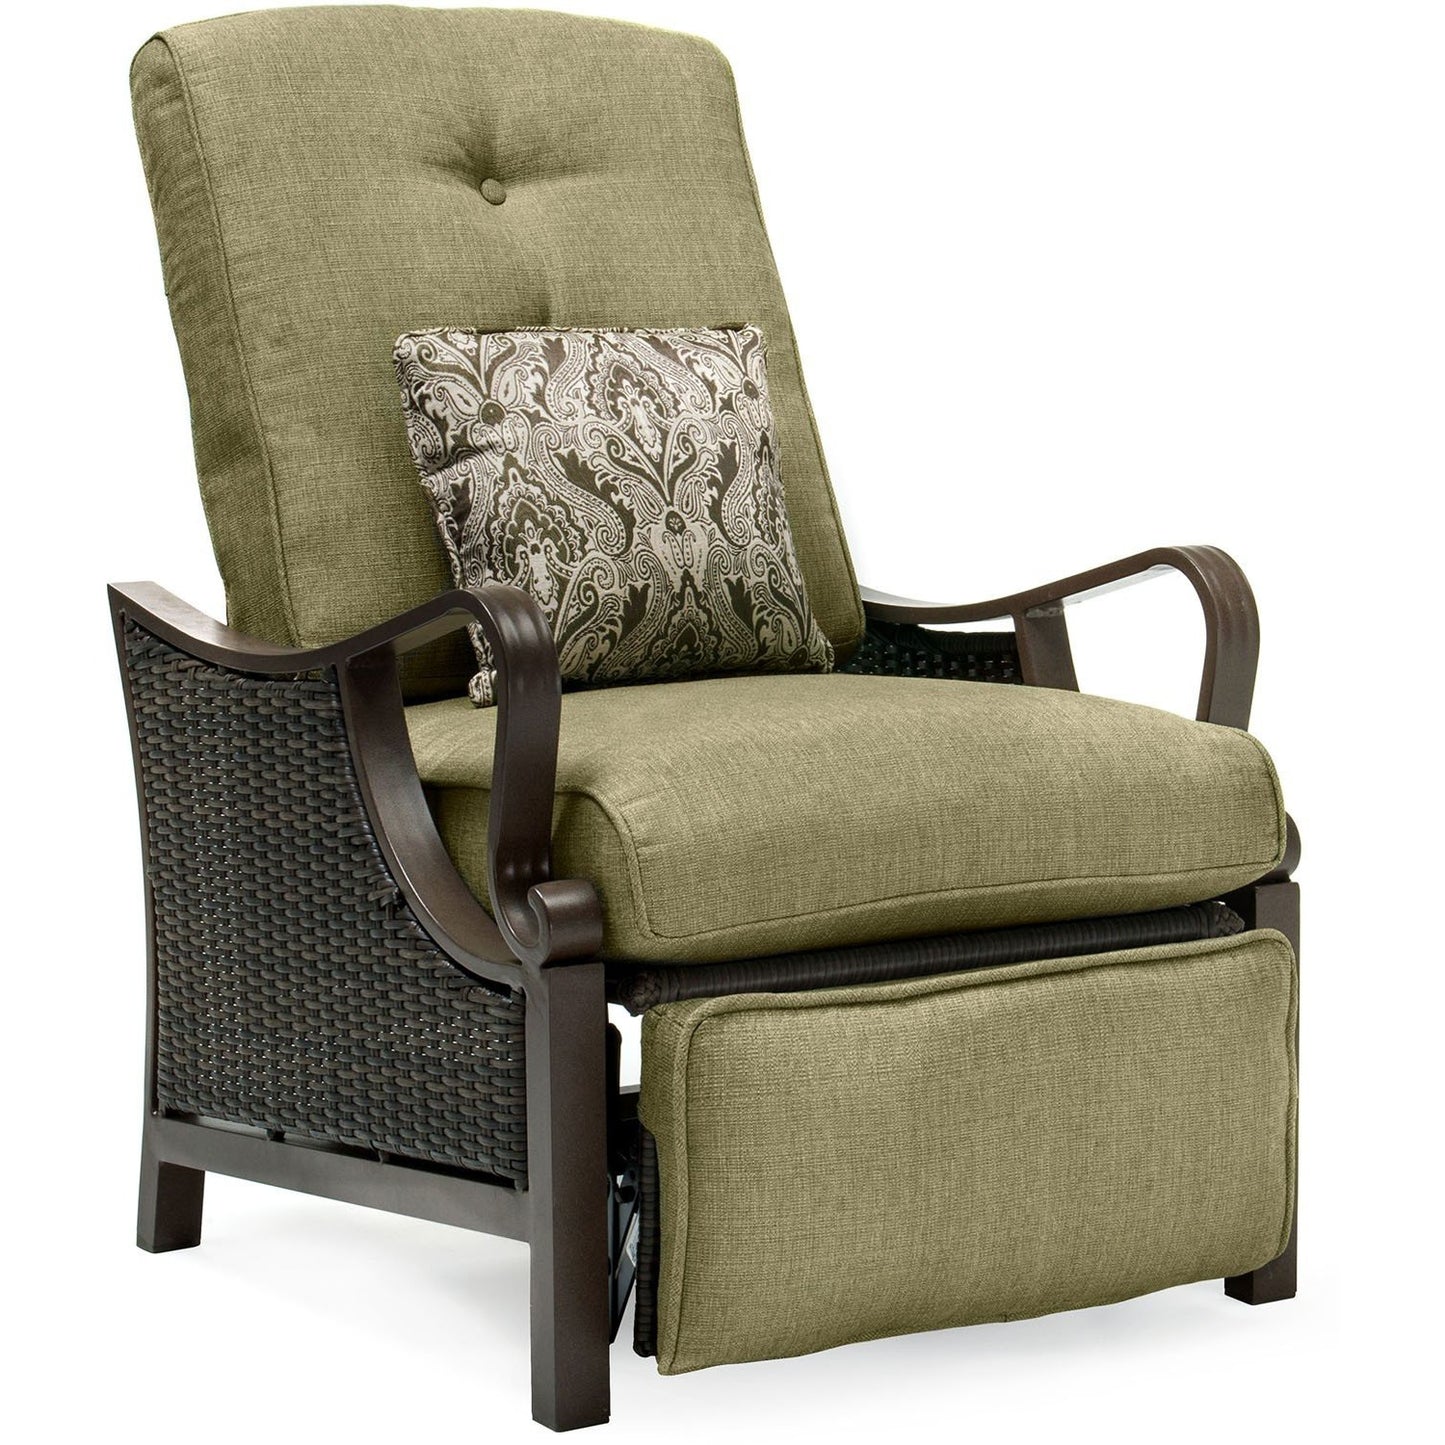 Hammond Casitas Luxury Reclining Patio Chair With Pillow Accessory - M&K Grills